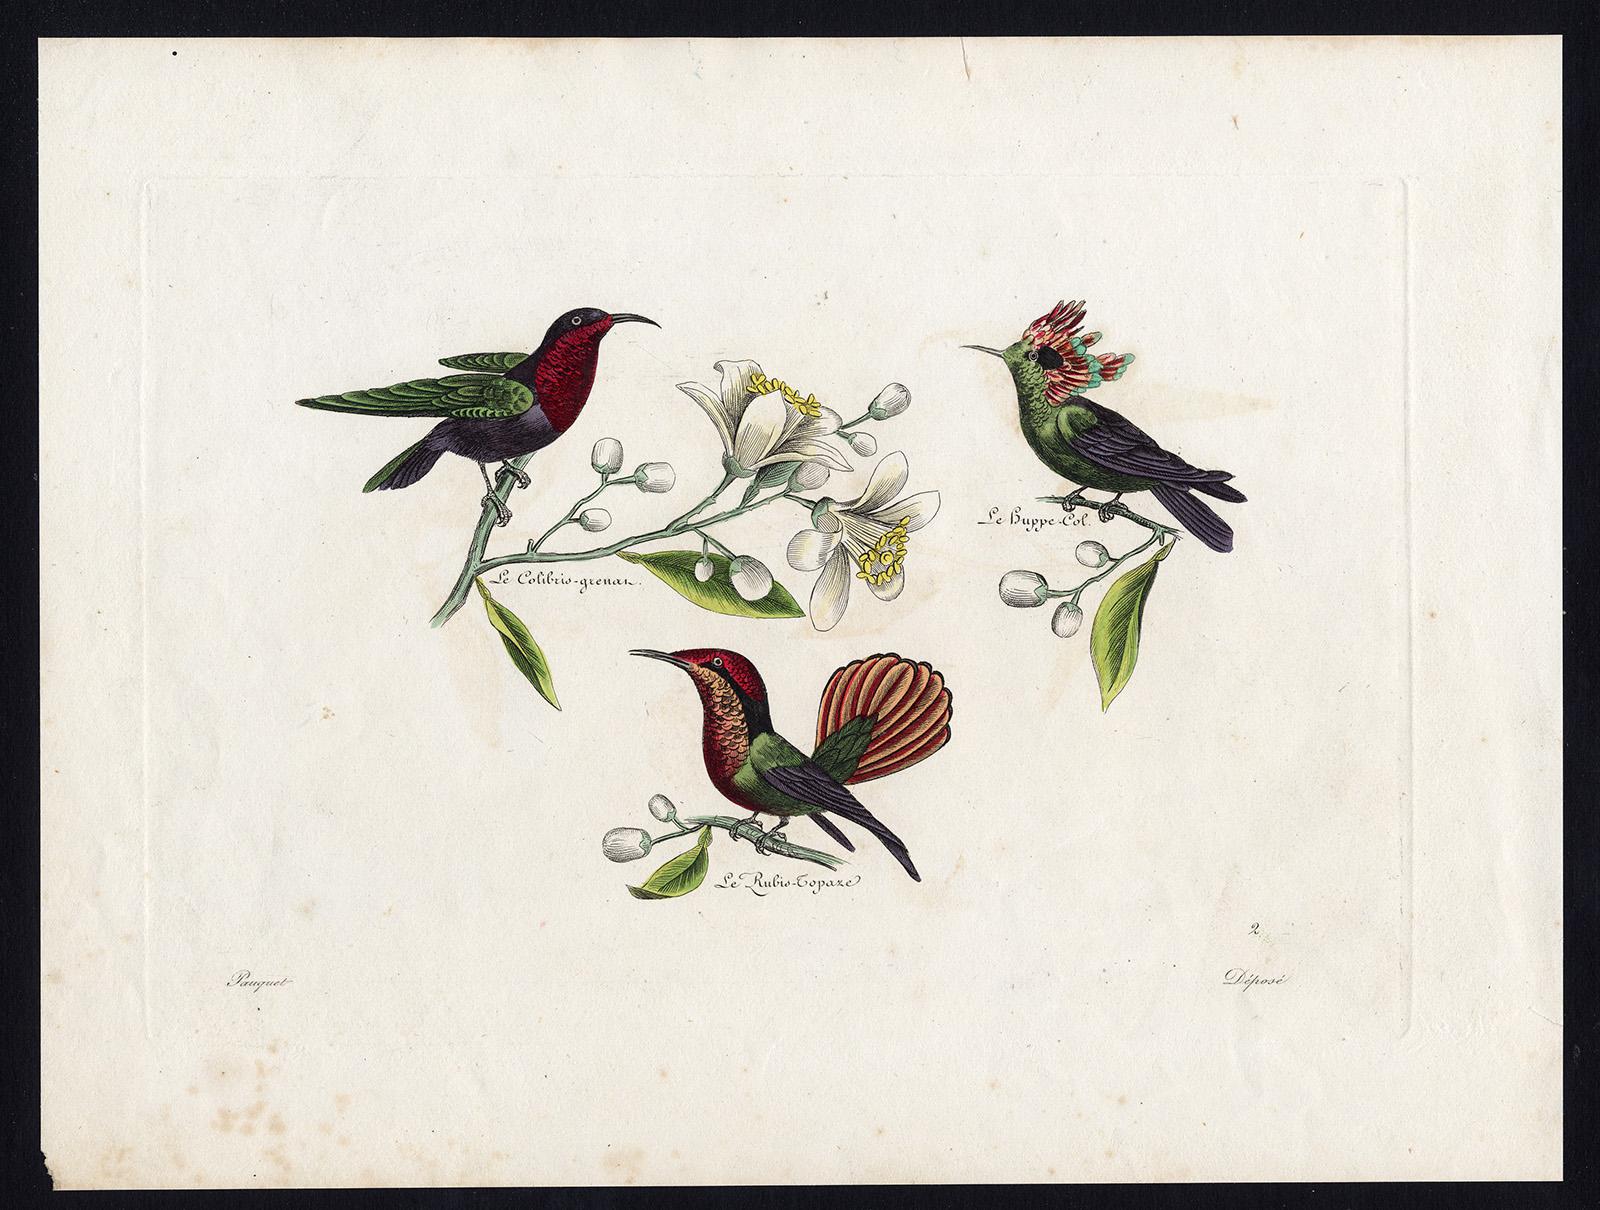 Three different Hummingbirds by Pauquet - Hand coloured engraving - 19th century - Print by Hippolyte Louis Emile Pauquet and Polydore Pauquet